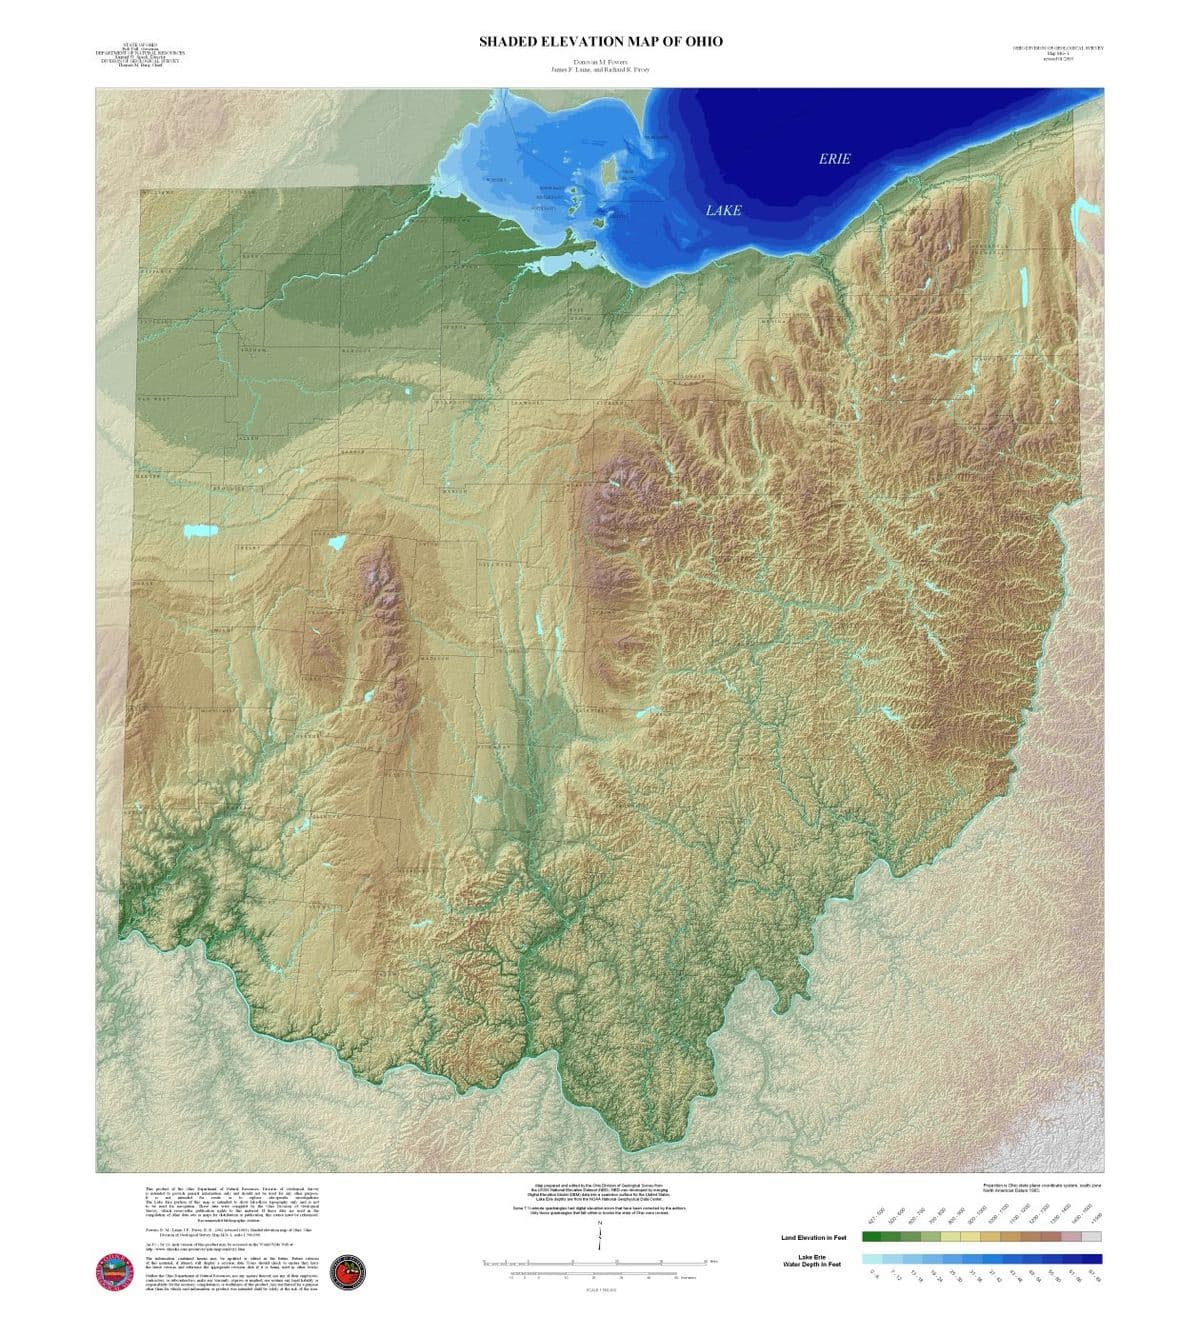 SHADED ELEVATION MAP OF OHIO
Donovn M Powers
Junmes Laine, and Rahand R Pavey
ERIE
LAKE
P n Co state plee ree en soh re
pe ty
Te Late pr ta tt l
Land Elevation in Feet
Lake Erie
Water Depth in Feet
d
